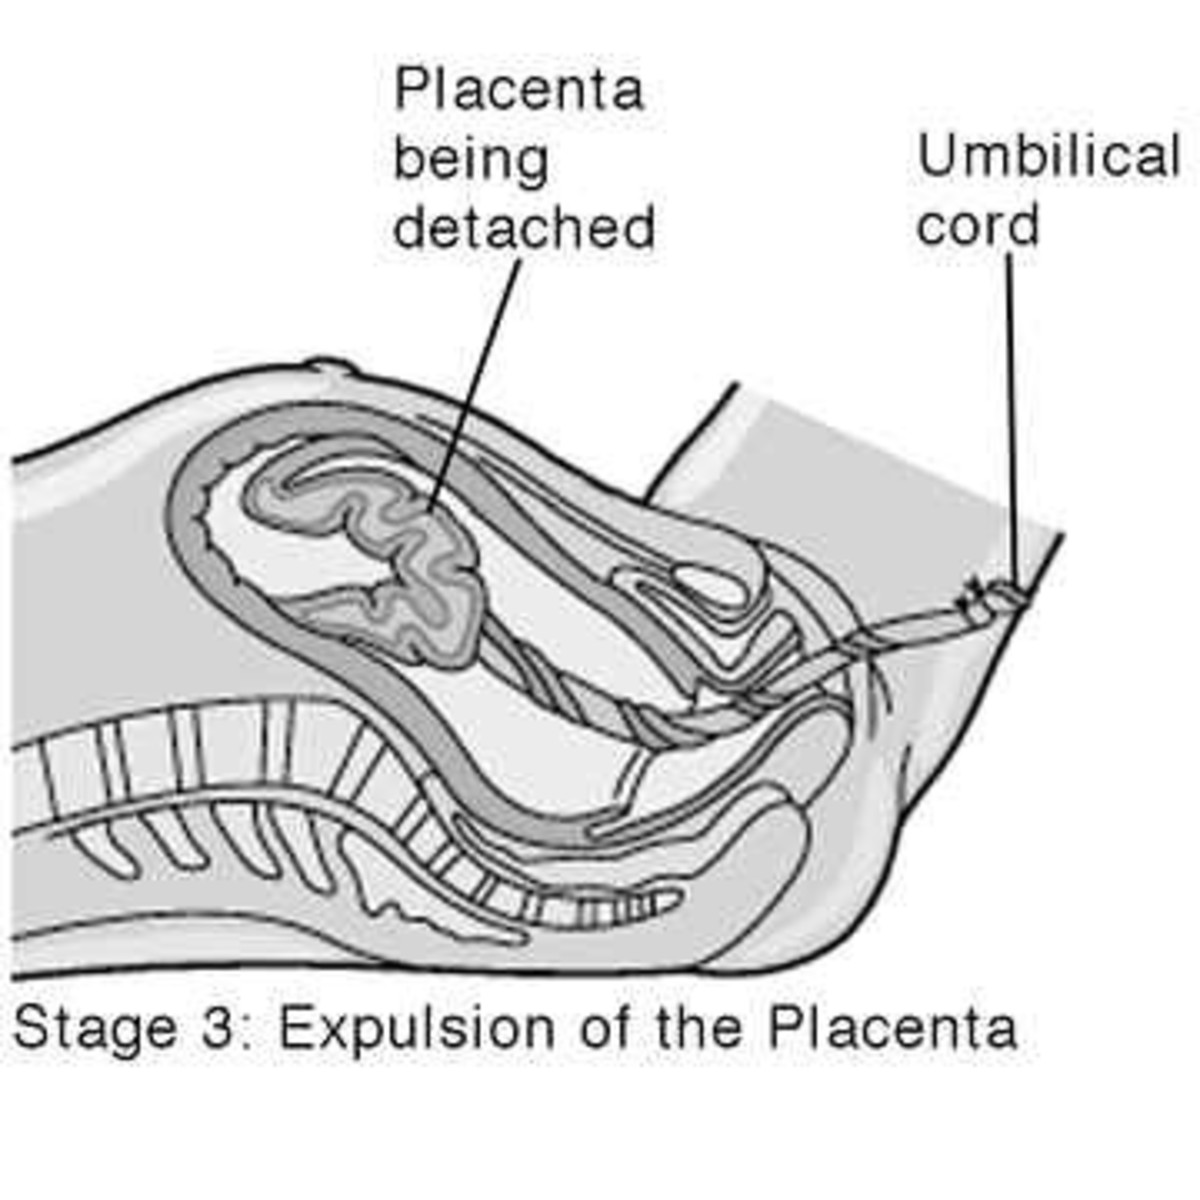 Stage 3 is the expulsion of the placenta.